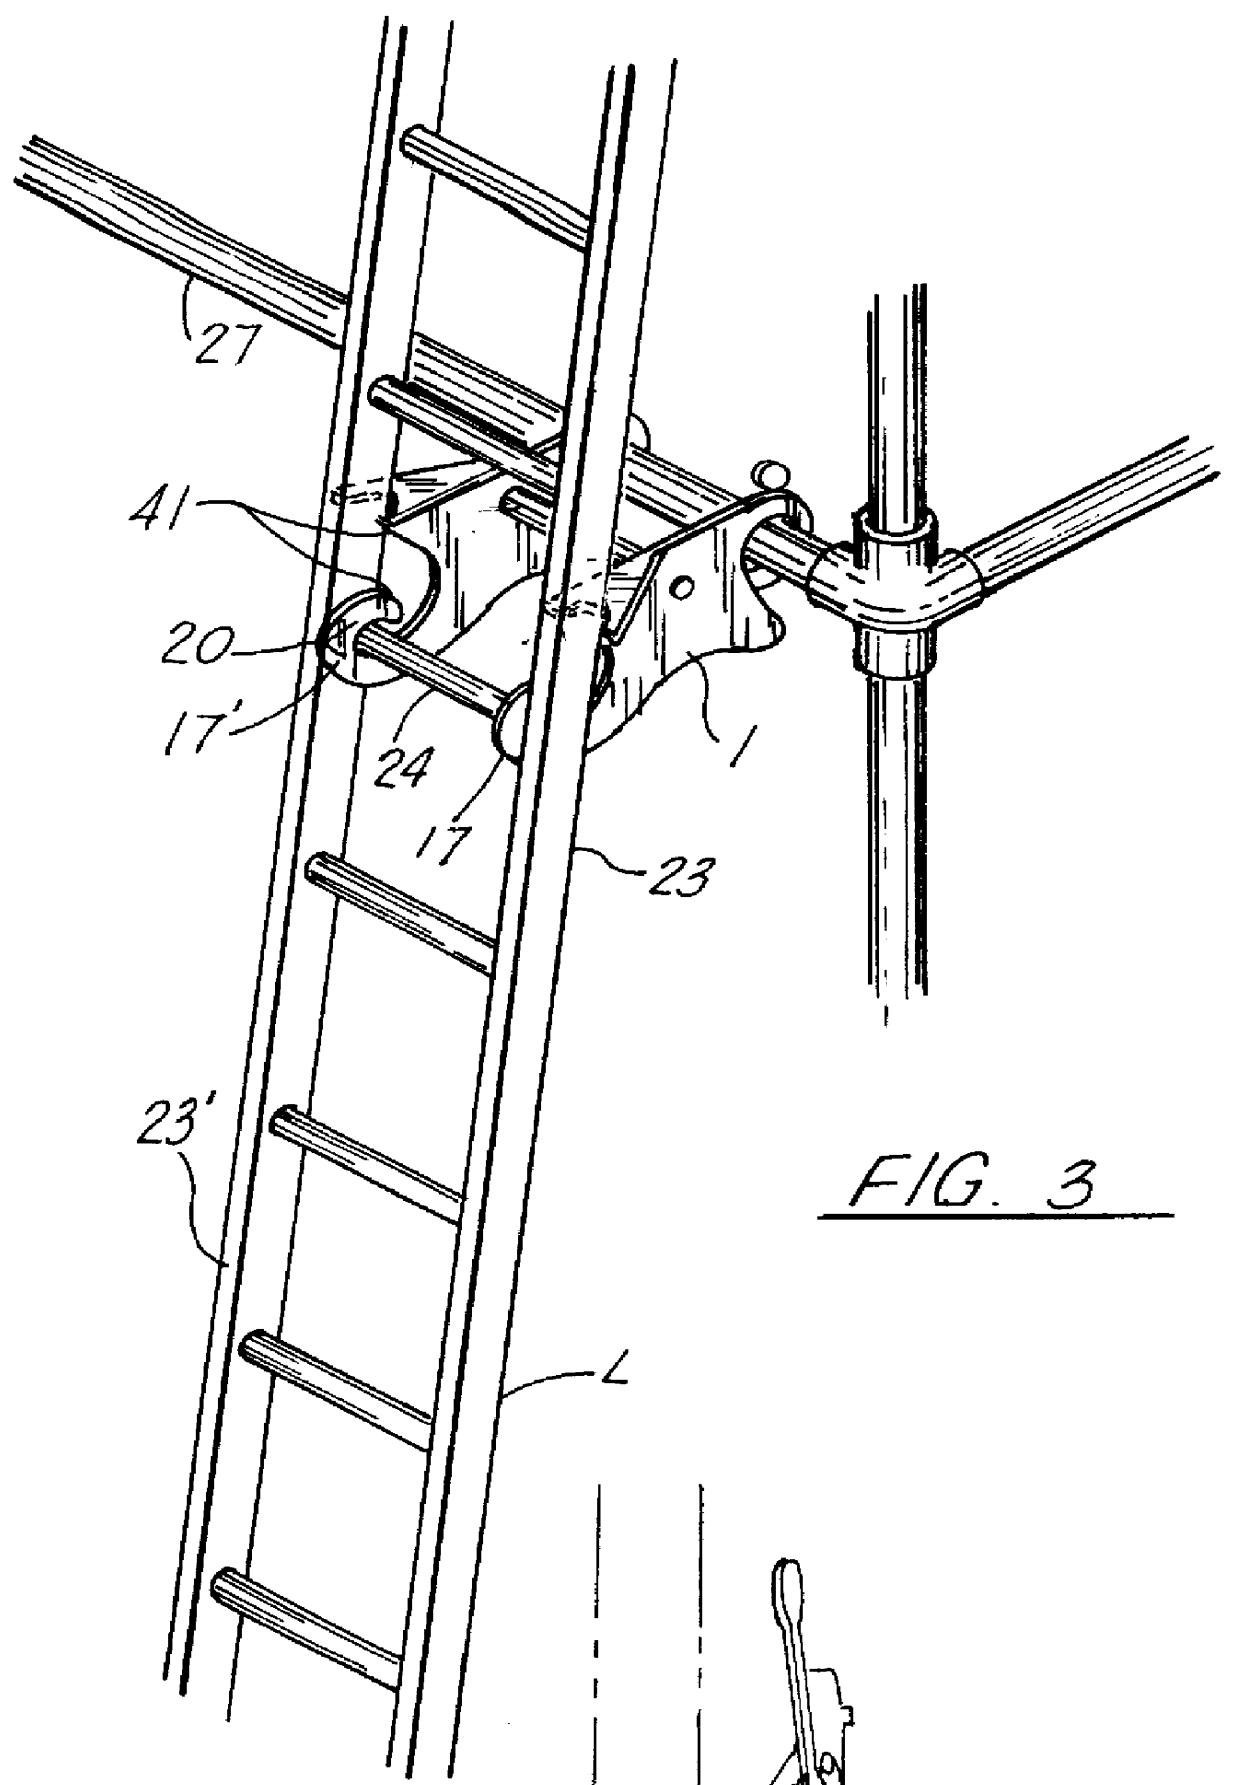 Stabilizing bracket for a ladder or the like